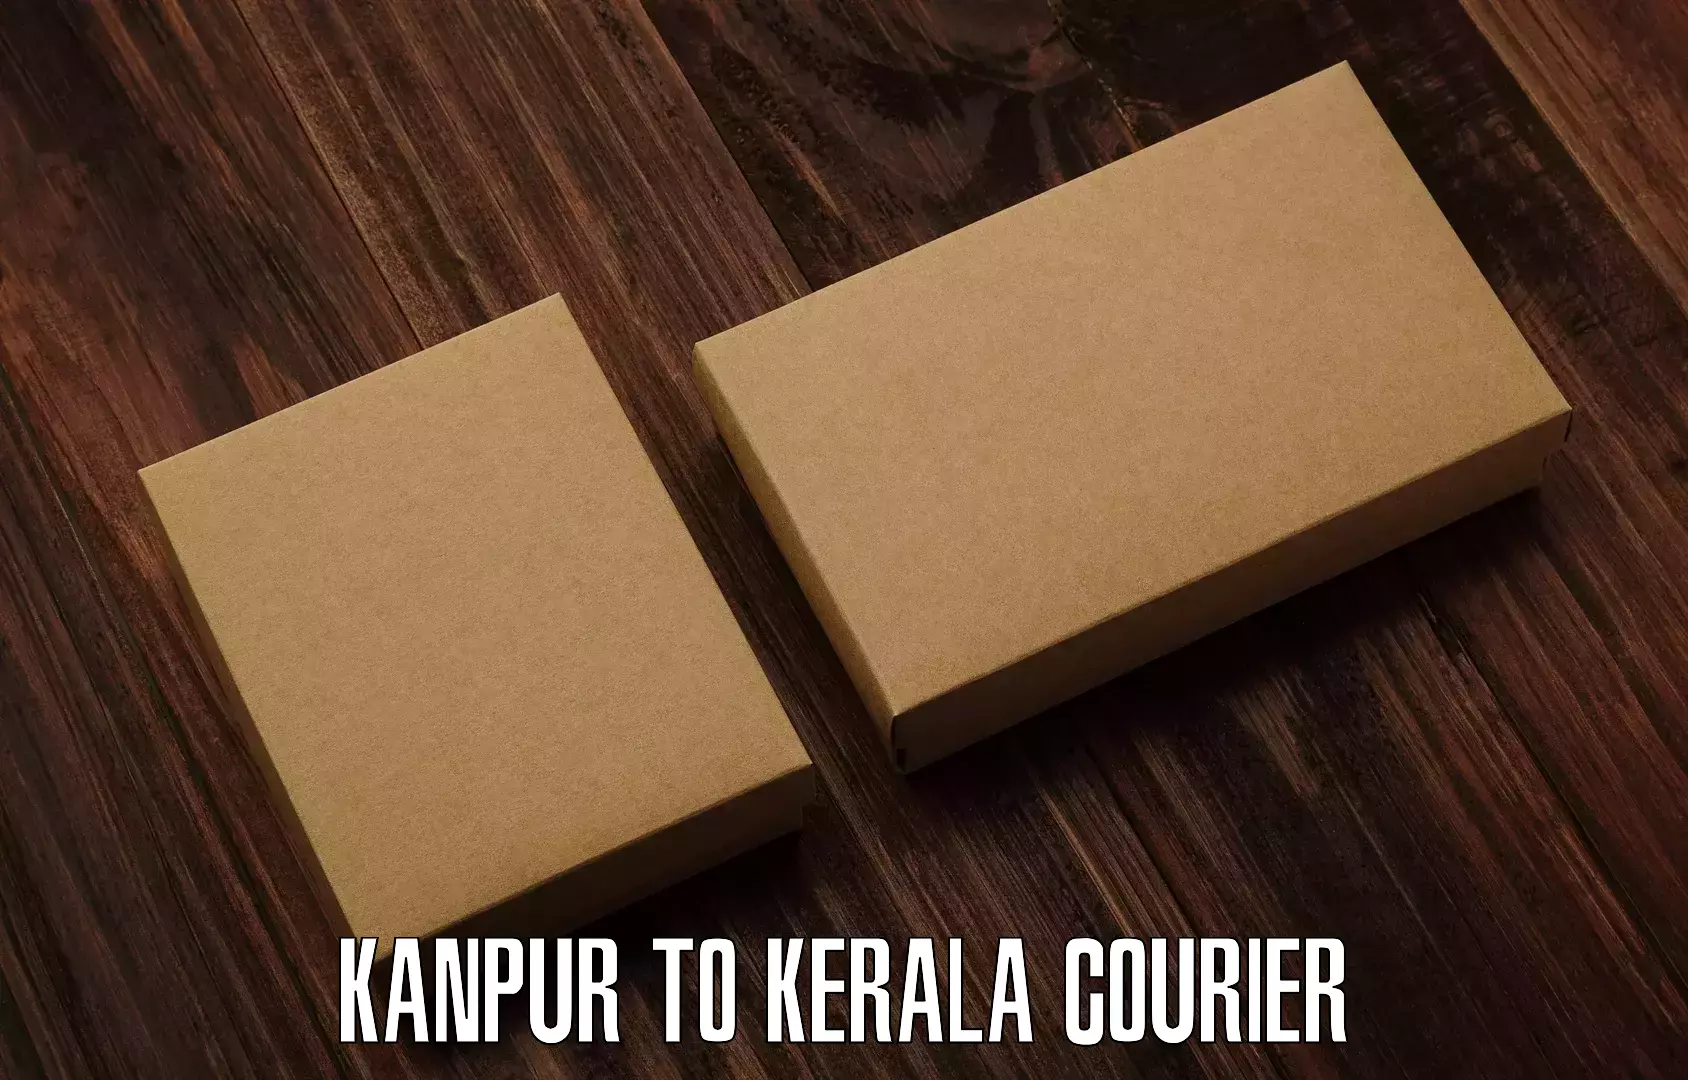 Business shipping needs Kanpur to Kerala